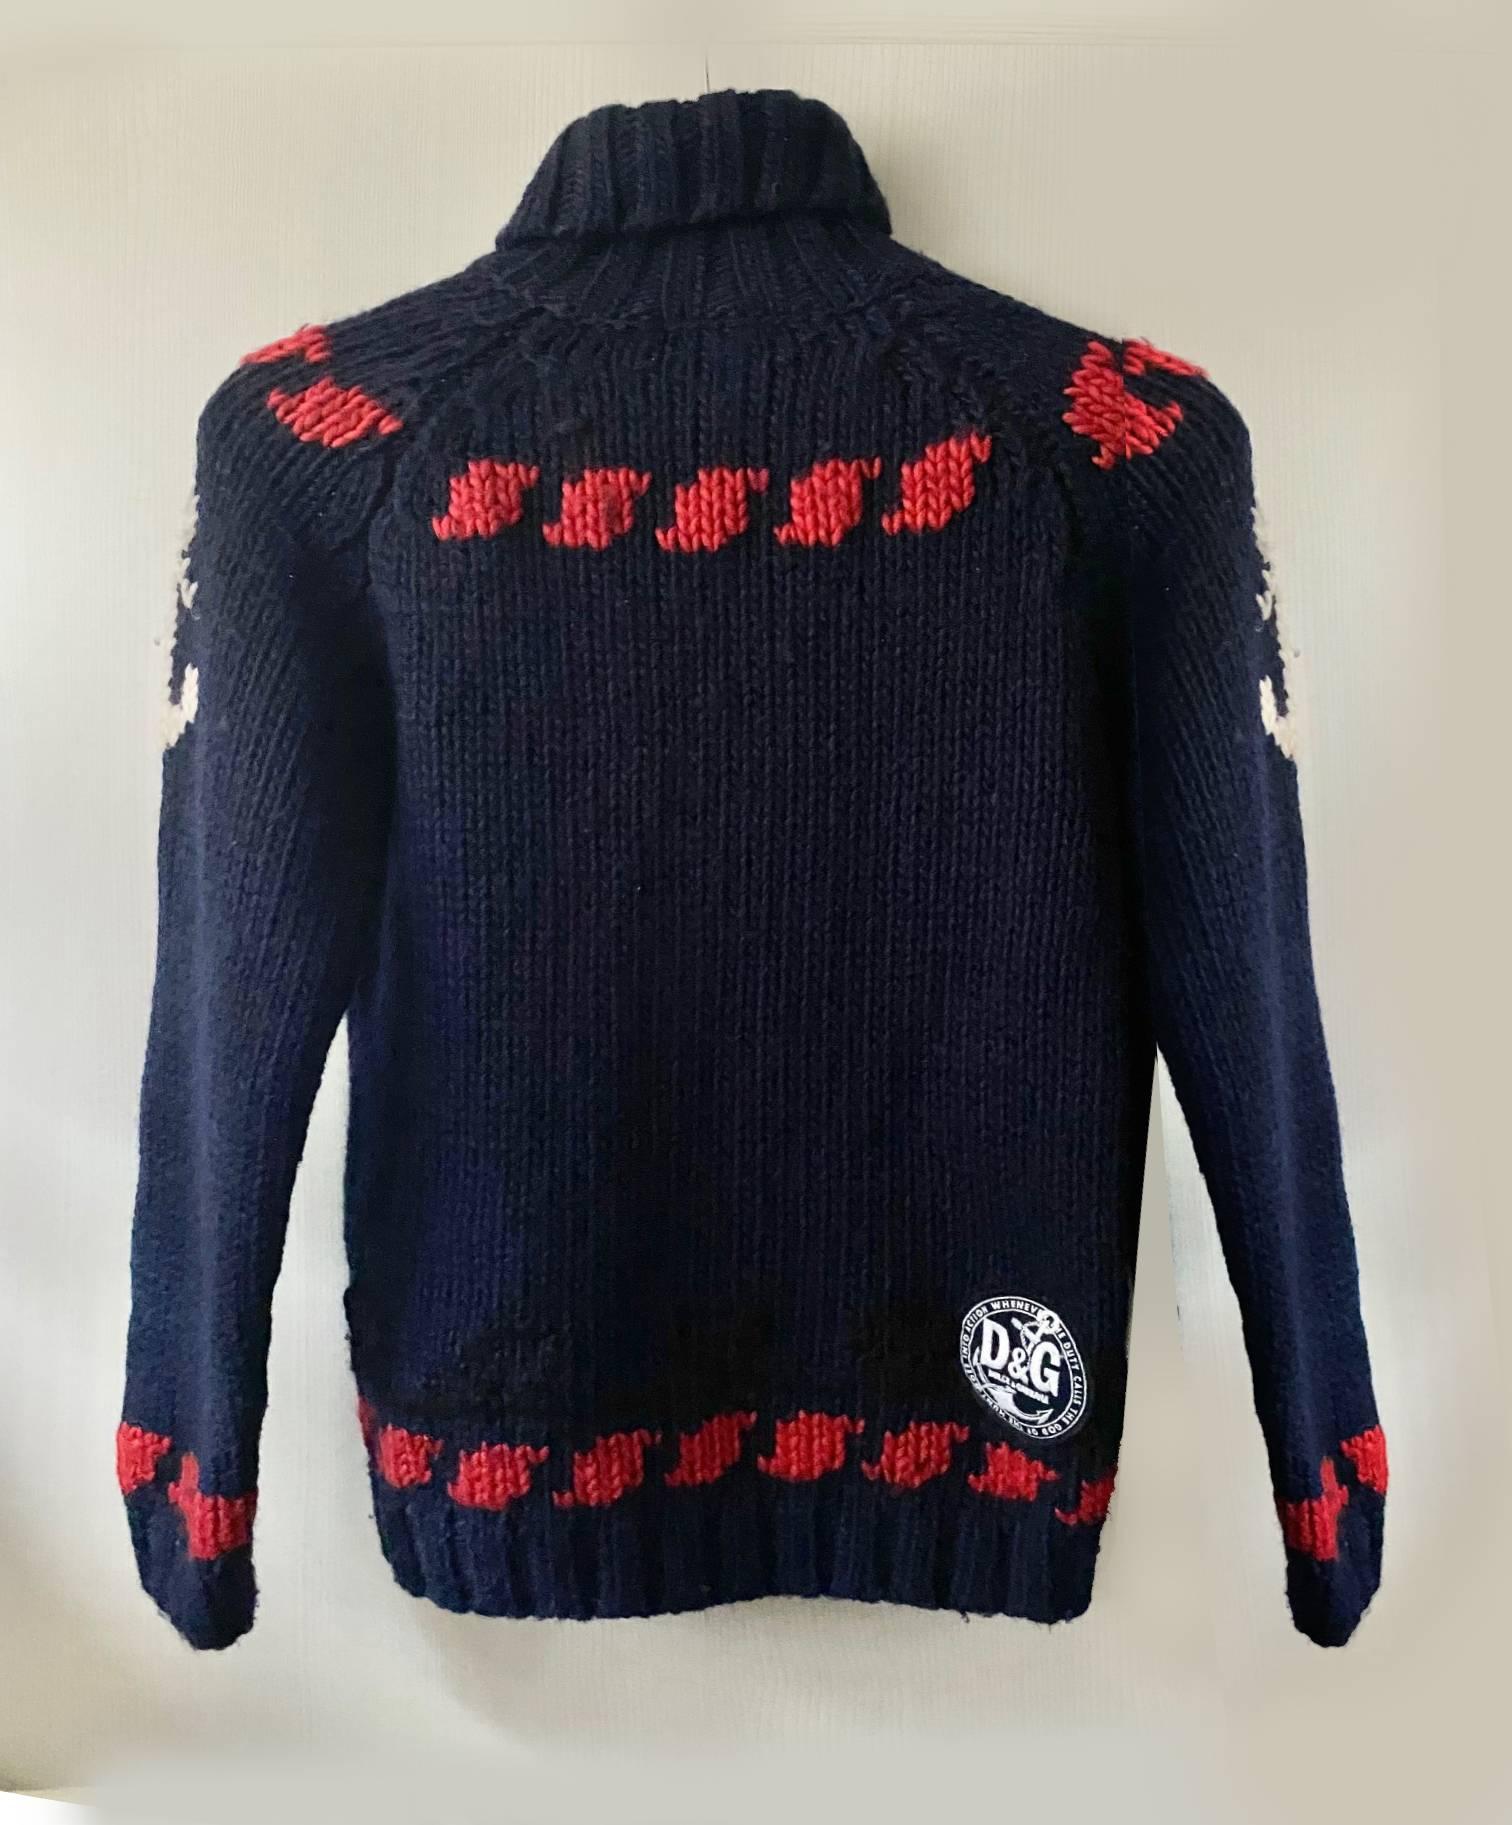 1990s Dolce & Gabbana Navy Blue Nautica Roller Neck Wool Sweater, front knitted anchor design, loose wear, 3 side neck button closure 

Size: 40 it - 10 UK - 2-4 USA 
Condition: 1990s, vintage, very good, light sign of wear


Measurements
- shoulder